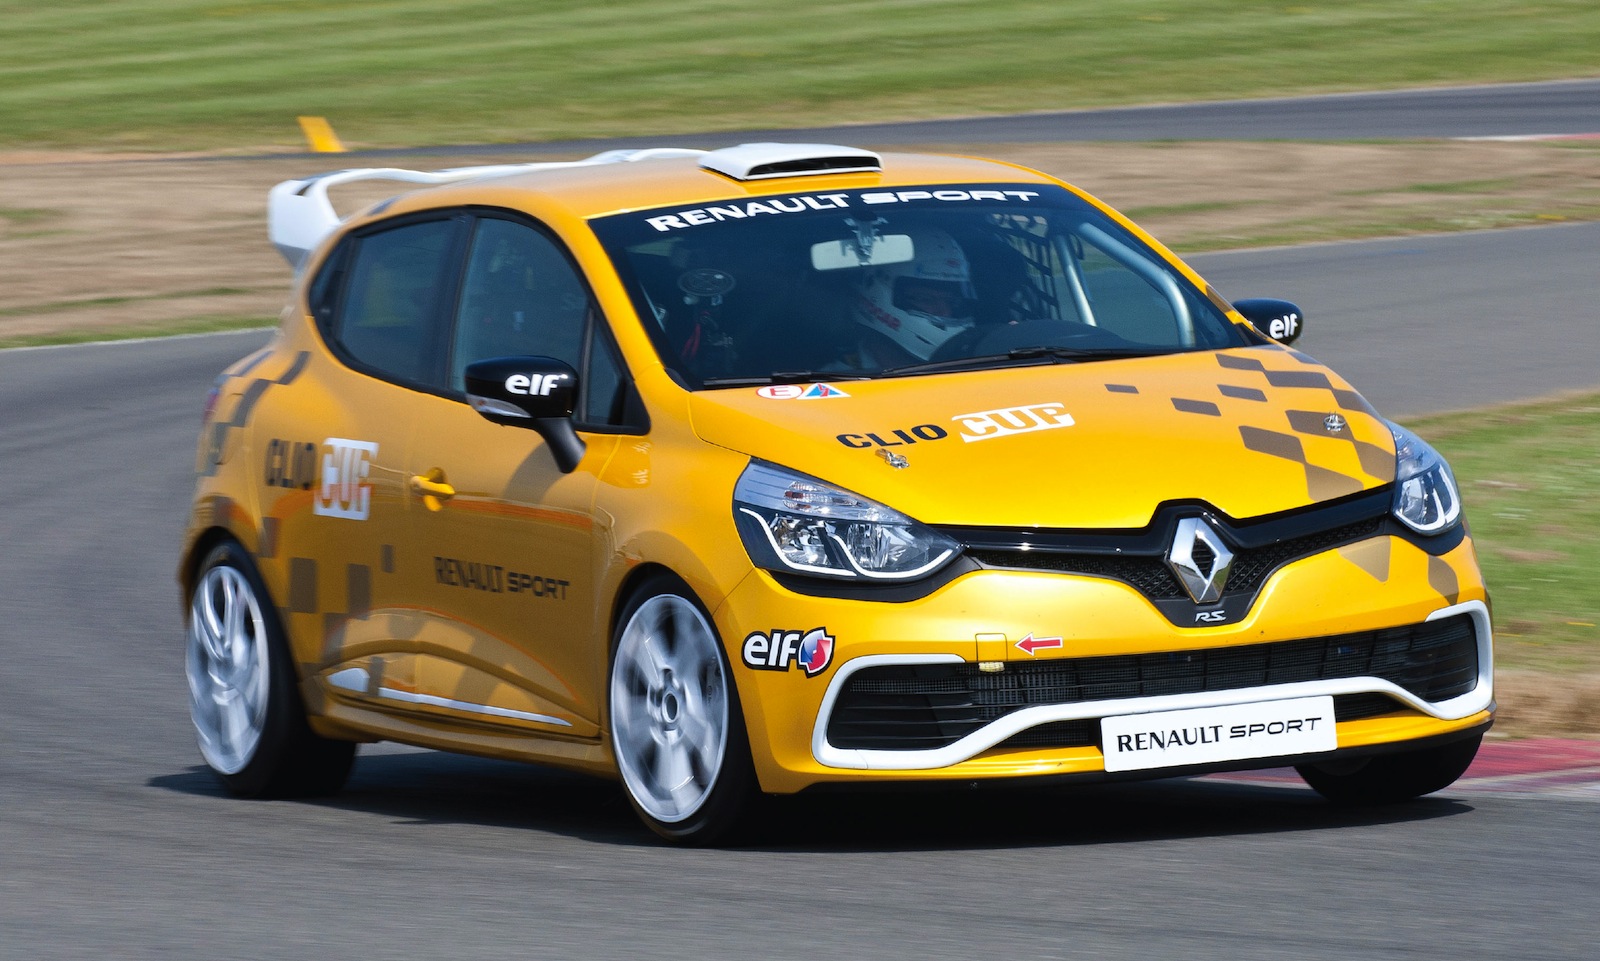 Renault-Clio-Cup-1.jpg